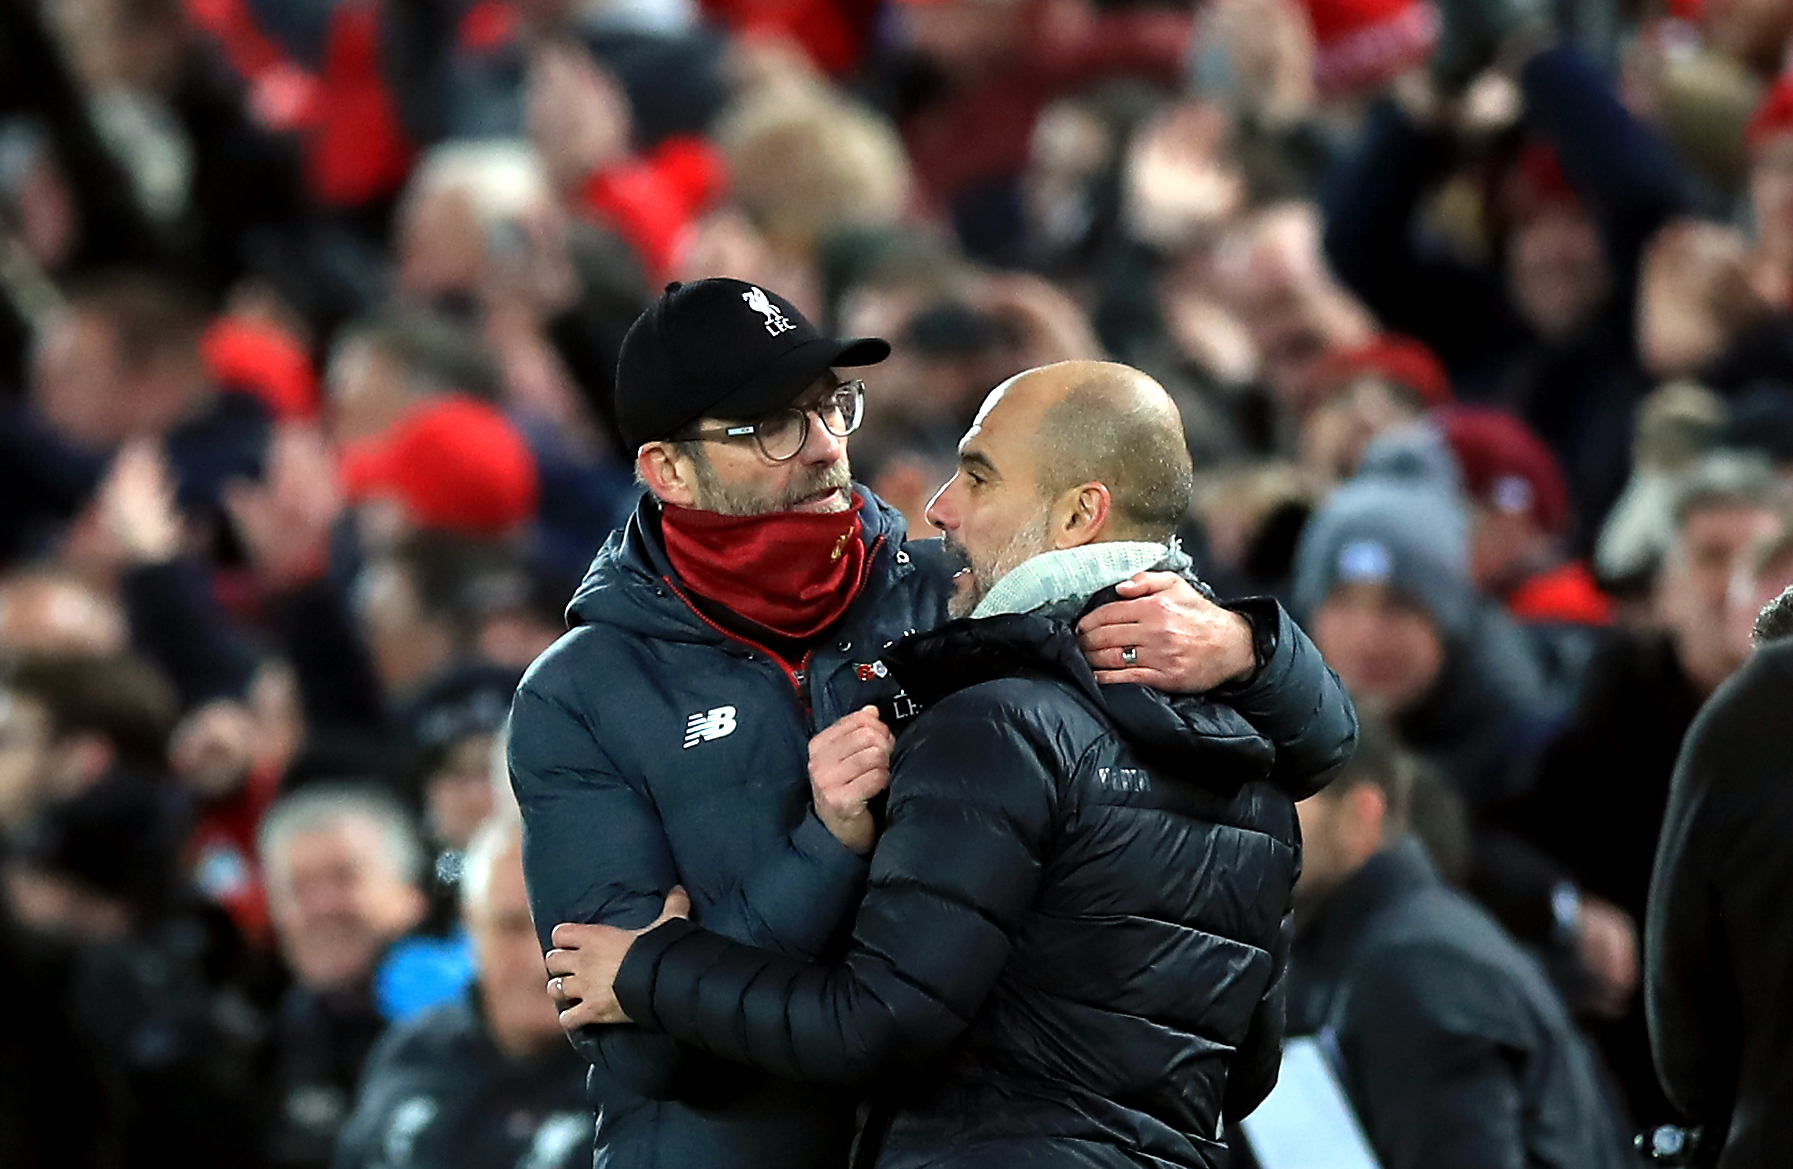 There’s a mutual respect between Jurgen Klopp and Pep Guardiola